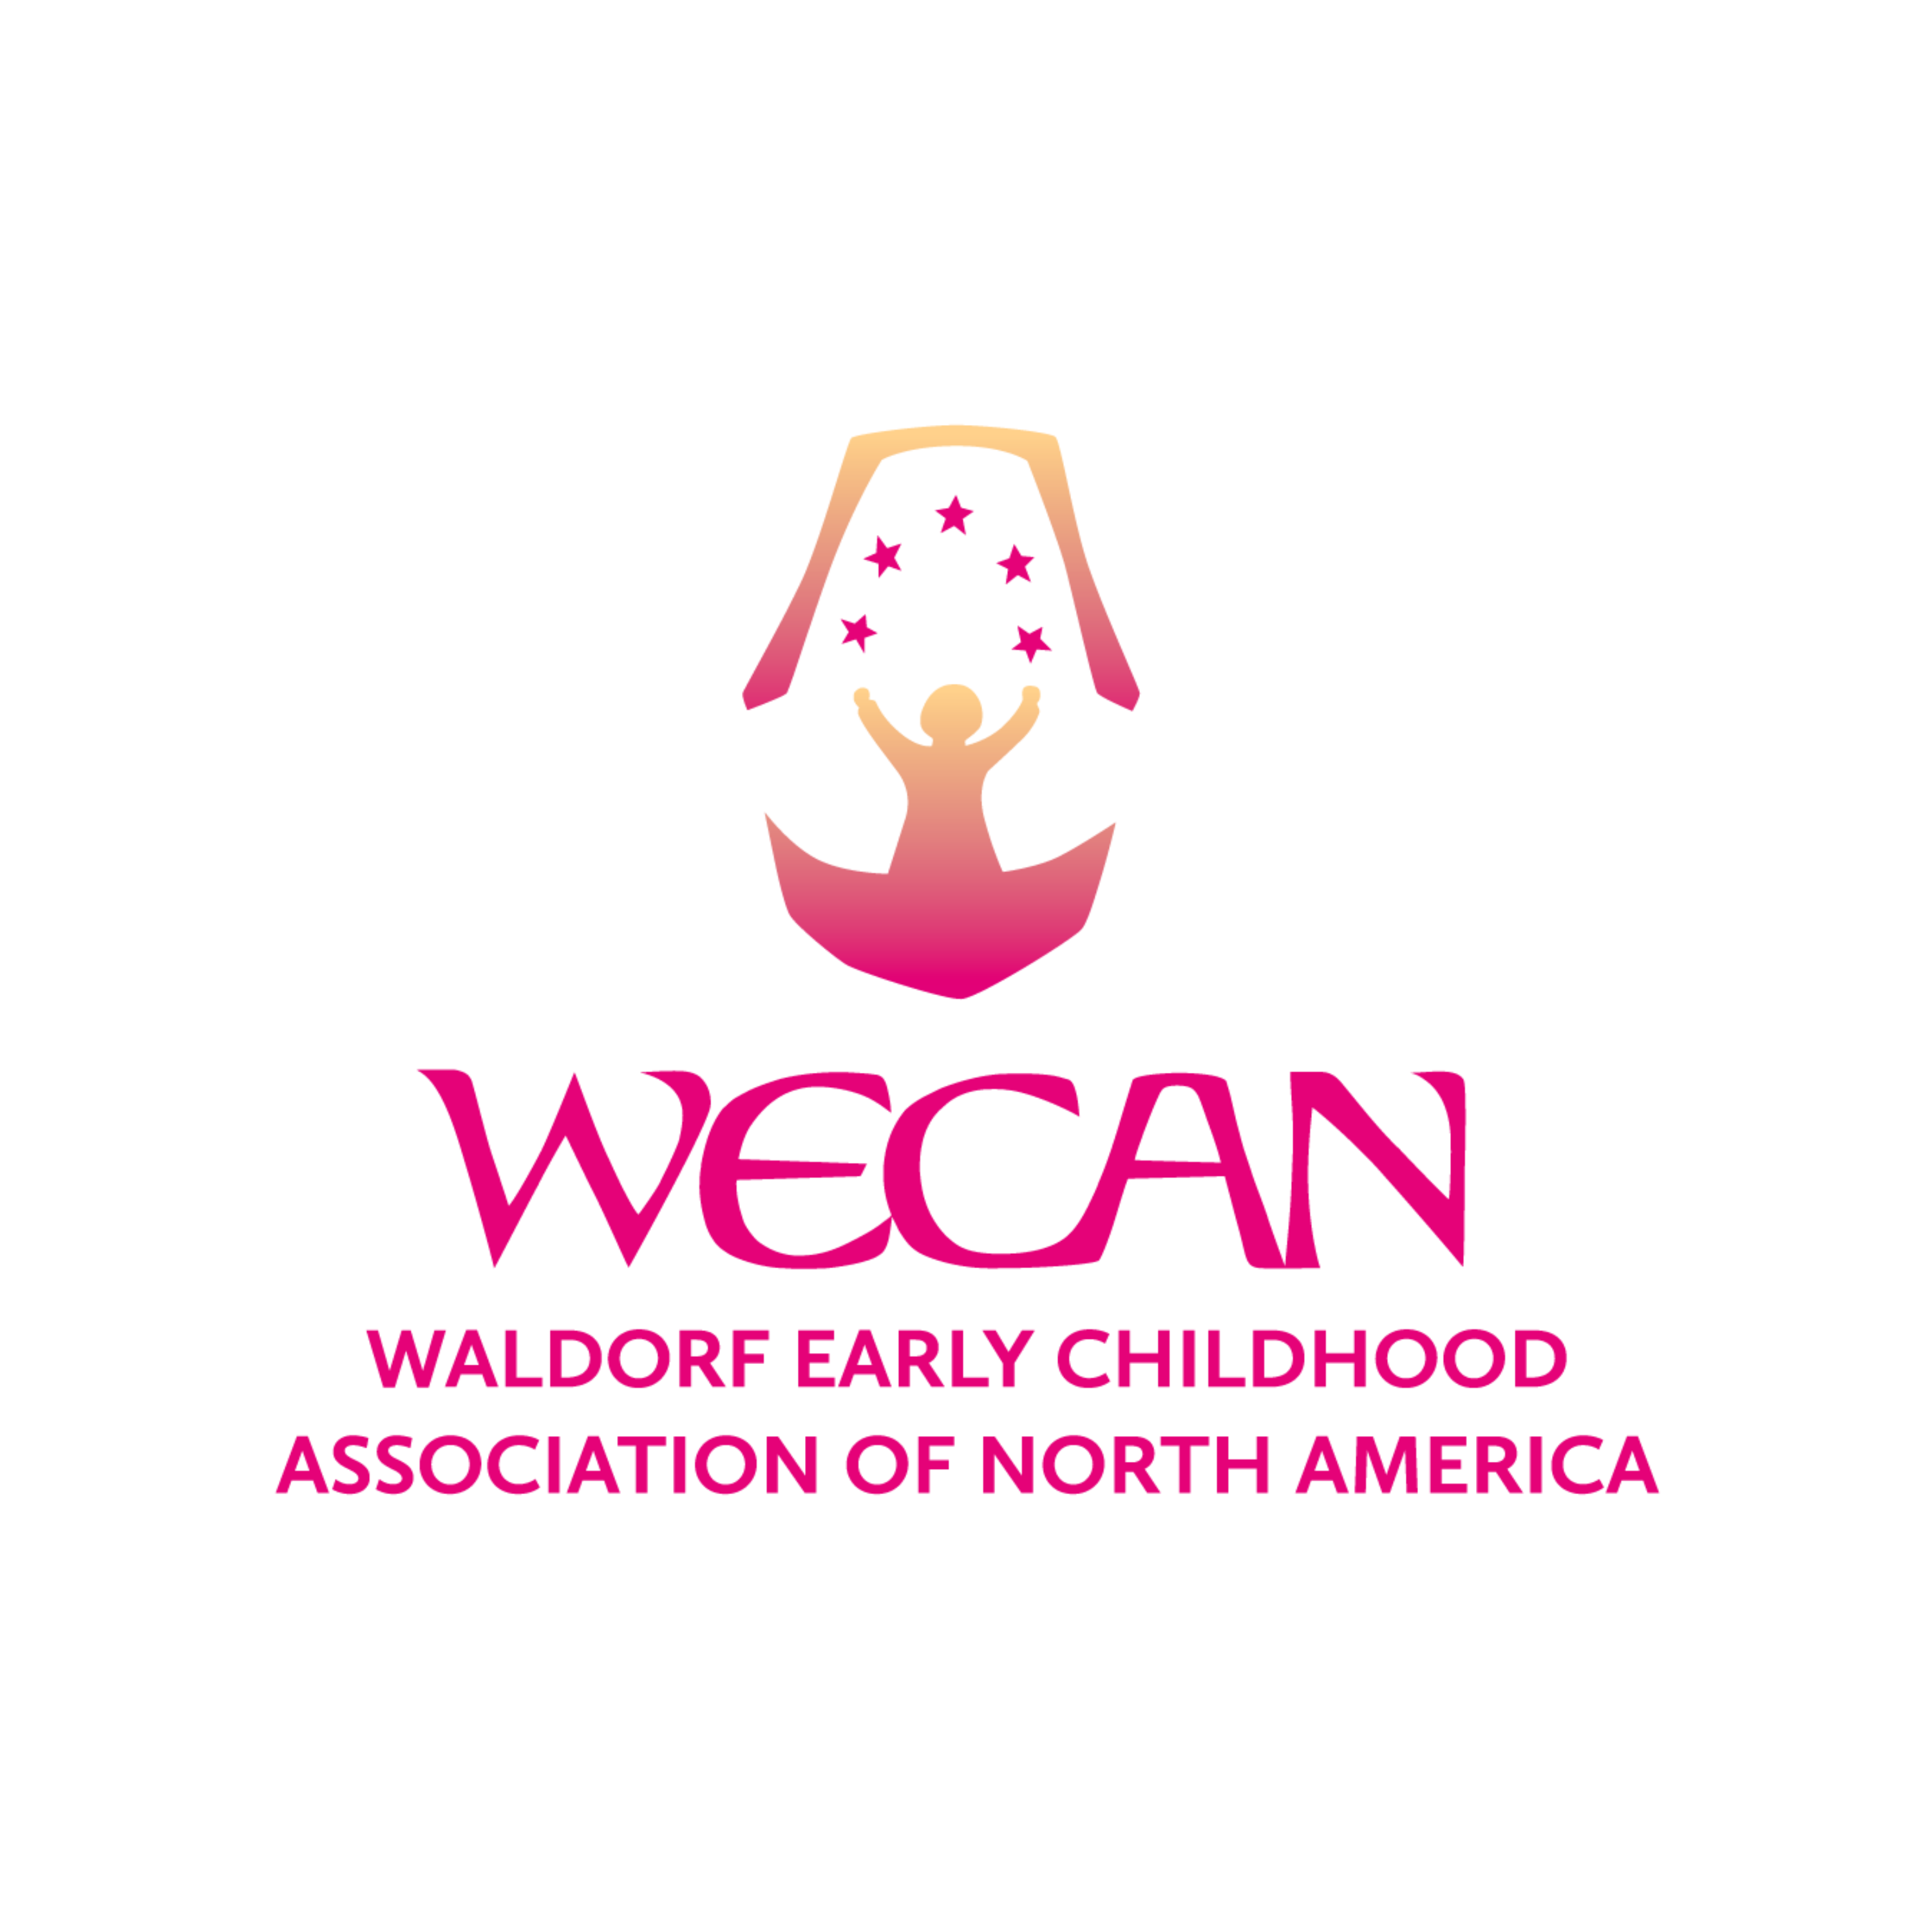 Donation to WECAN